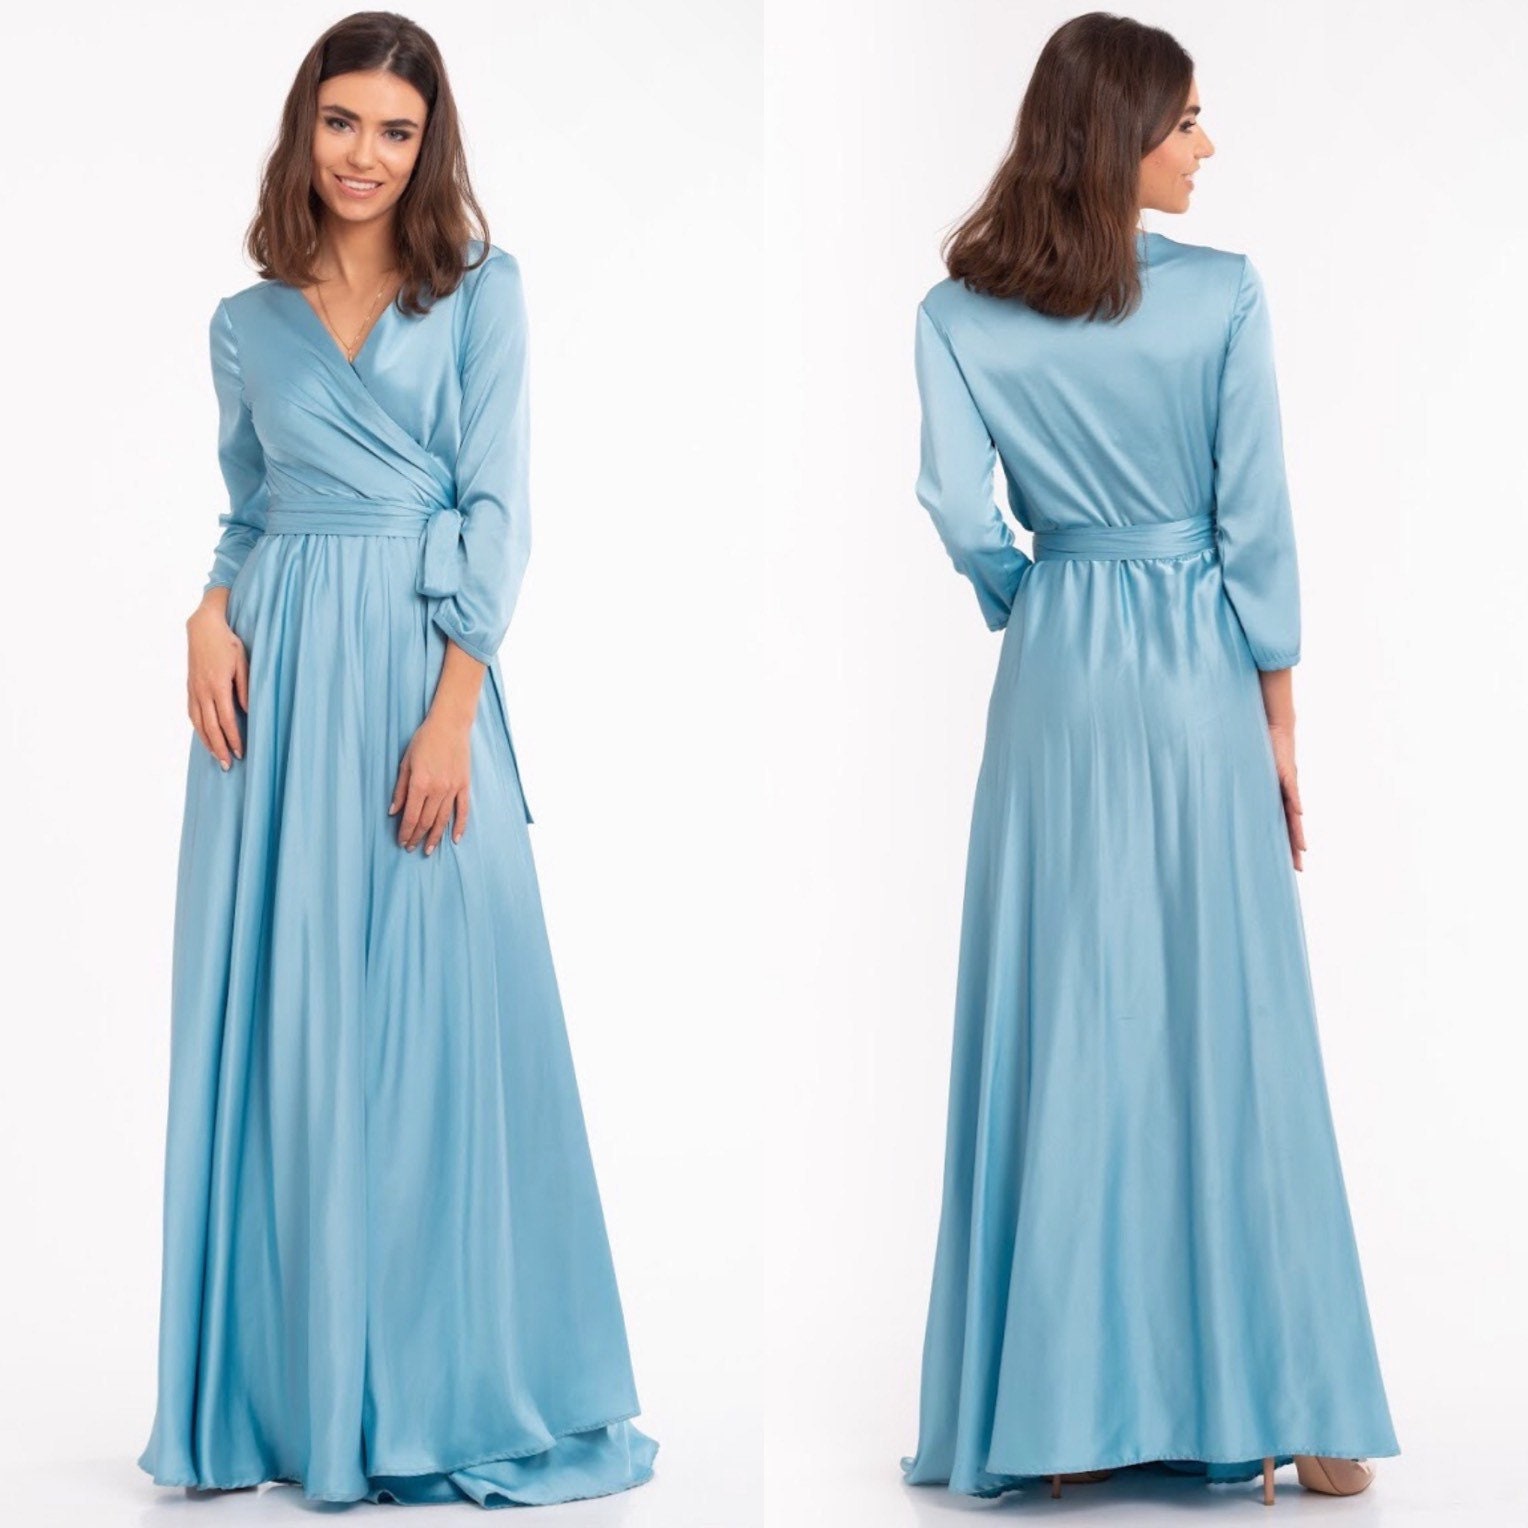 Fashionable Off-the-shoulder Sky Blue Satin Prom Dress - Lunss